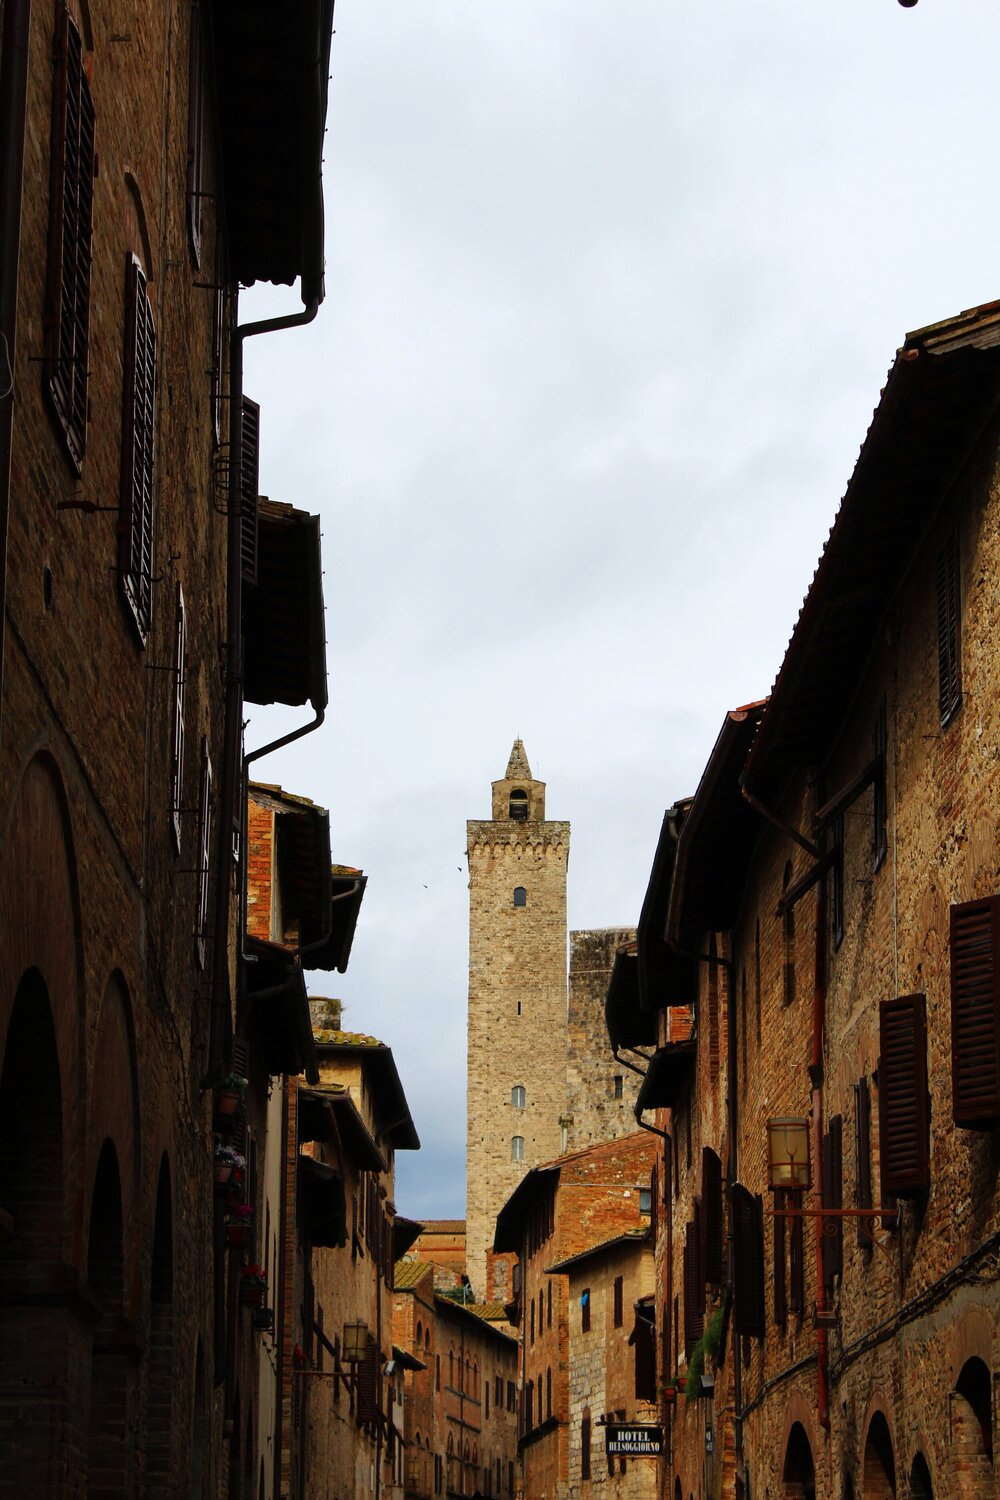 View of the tower from Via San Giovanni